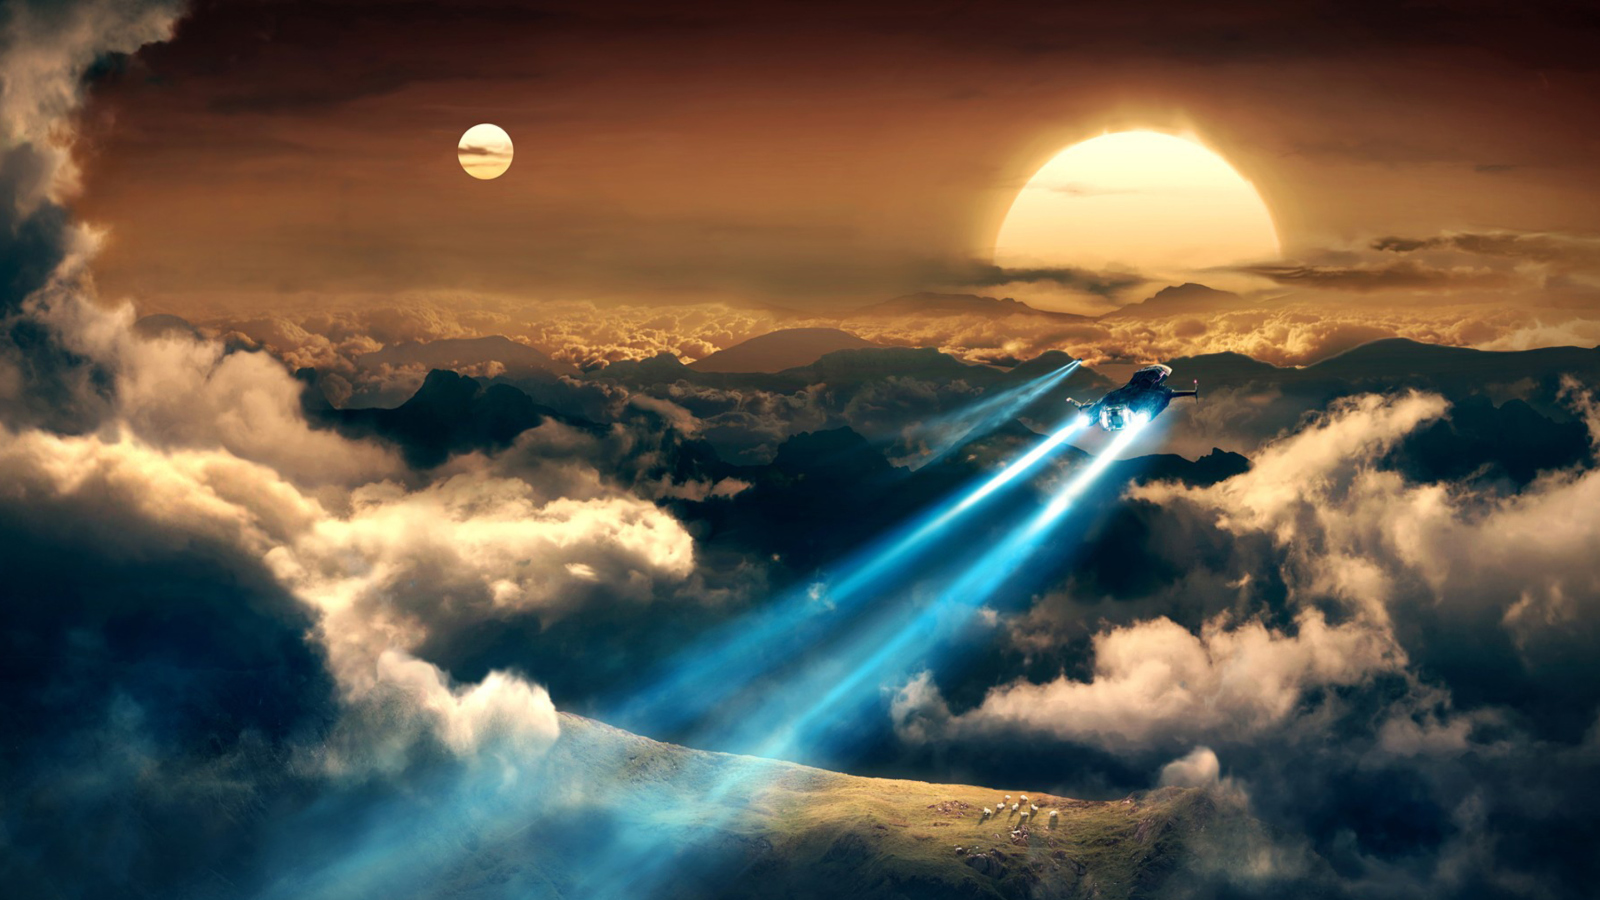 Spaceships In The Sky wallpaper 1600x900